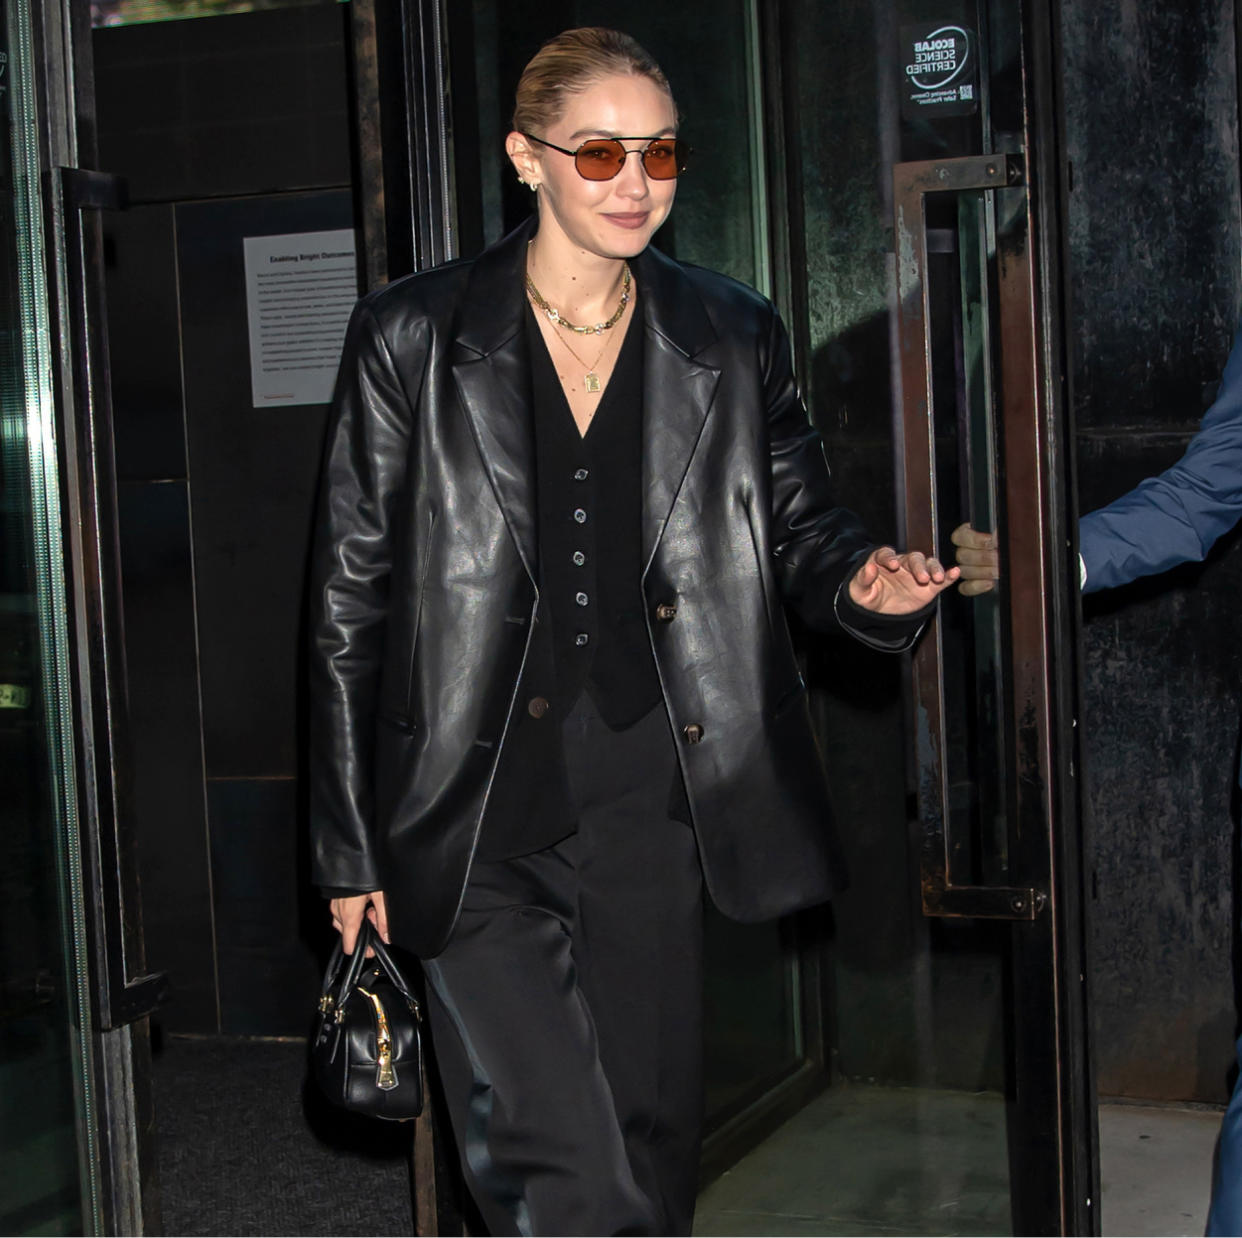  Gigi Hadid wears an all-black suit outfit in New York City. 